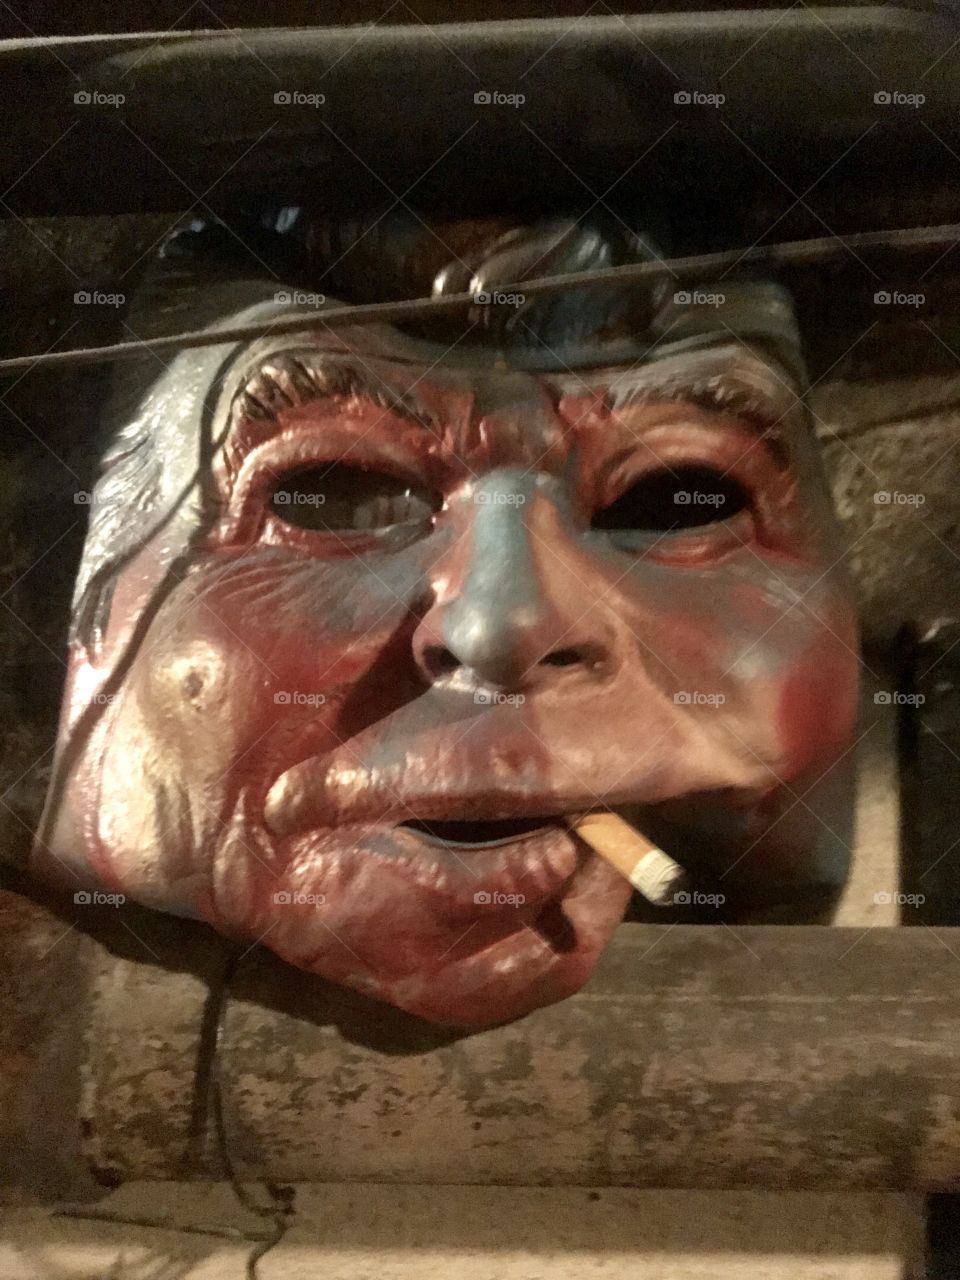 An old Reagan mask takes on an eerie composure, including a glass eye and cigarette, after years within a dark cellar beneath businesses in downtown Pocatello, ID.